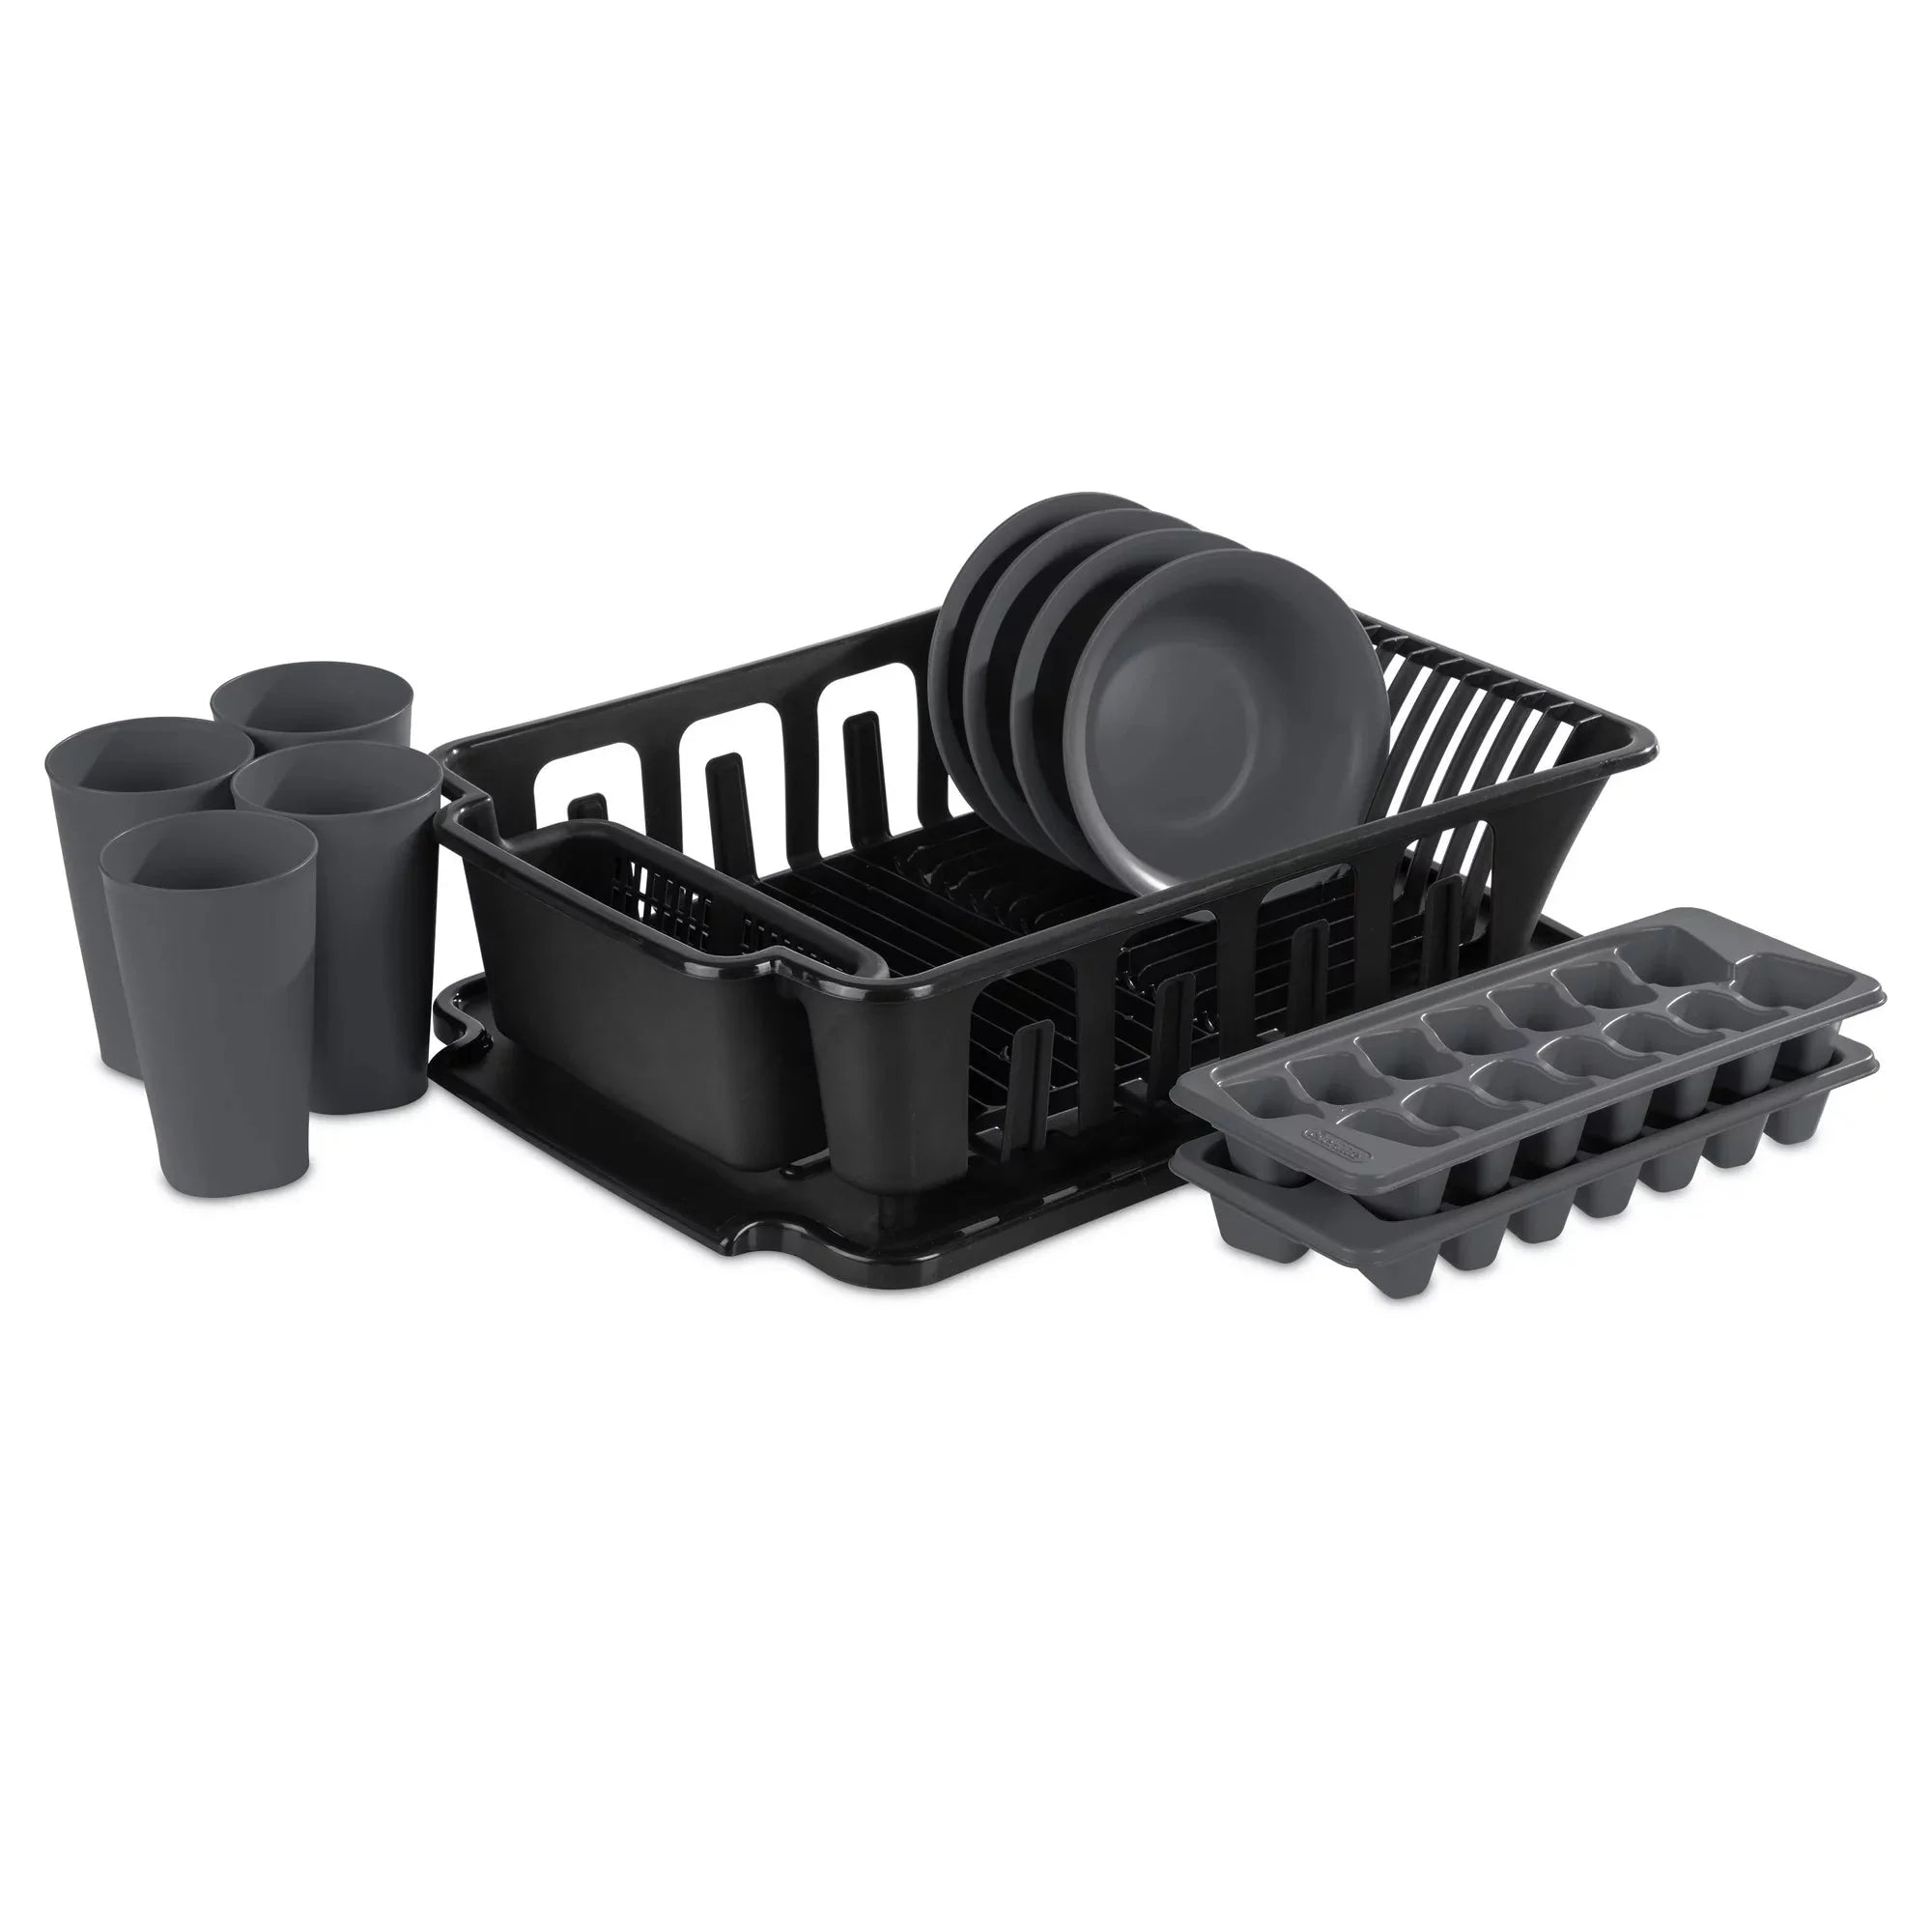 Wholesale prices with free shipping all over United States Sterilite 12 Piece Kitchen Set Plastic, Black - Steven Deals